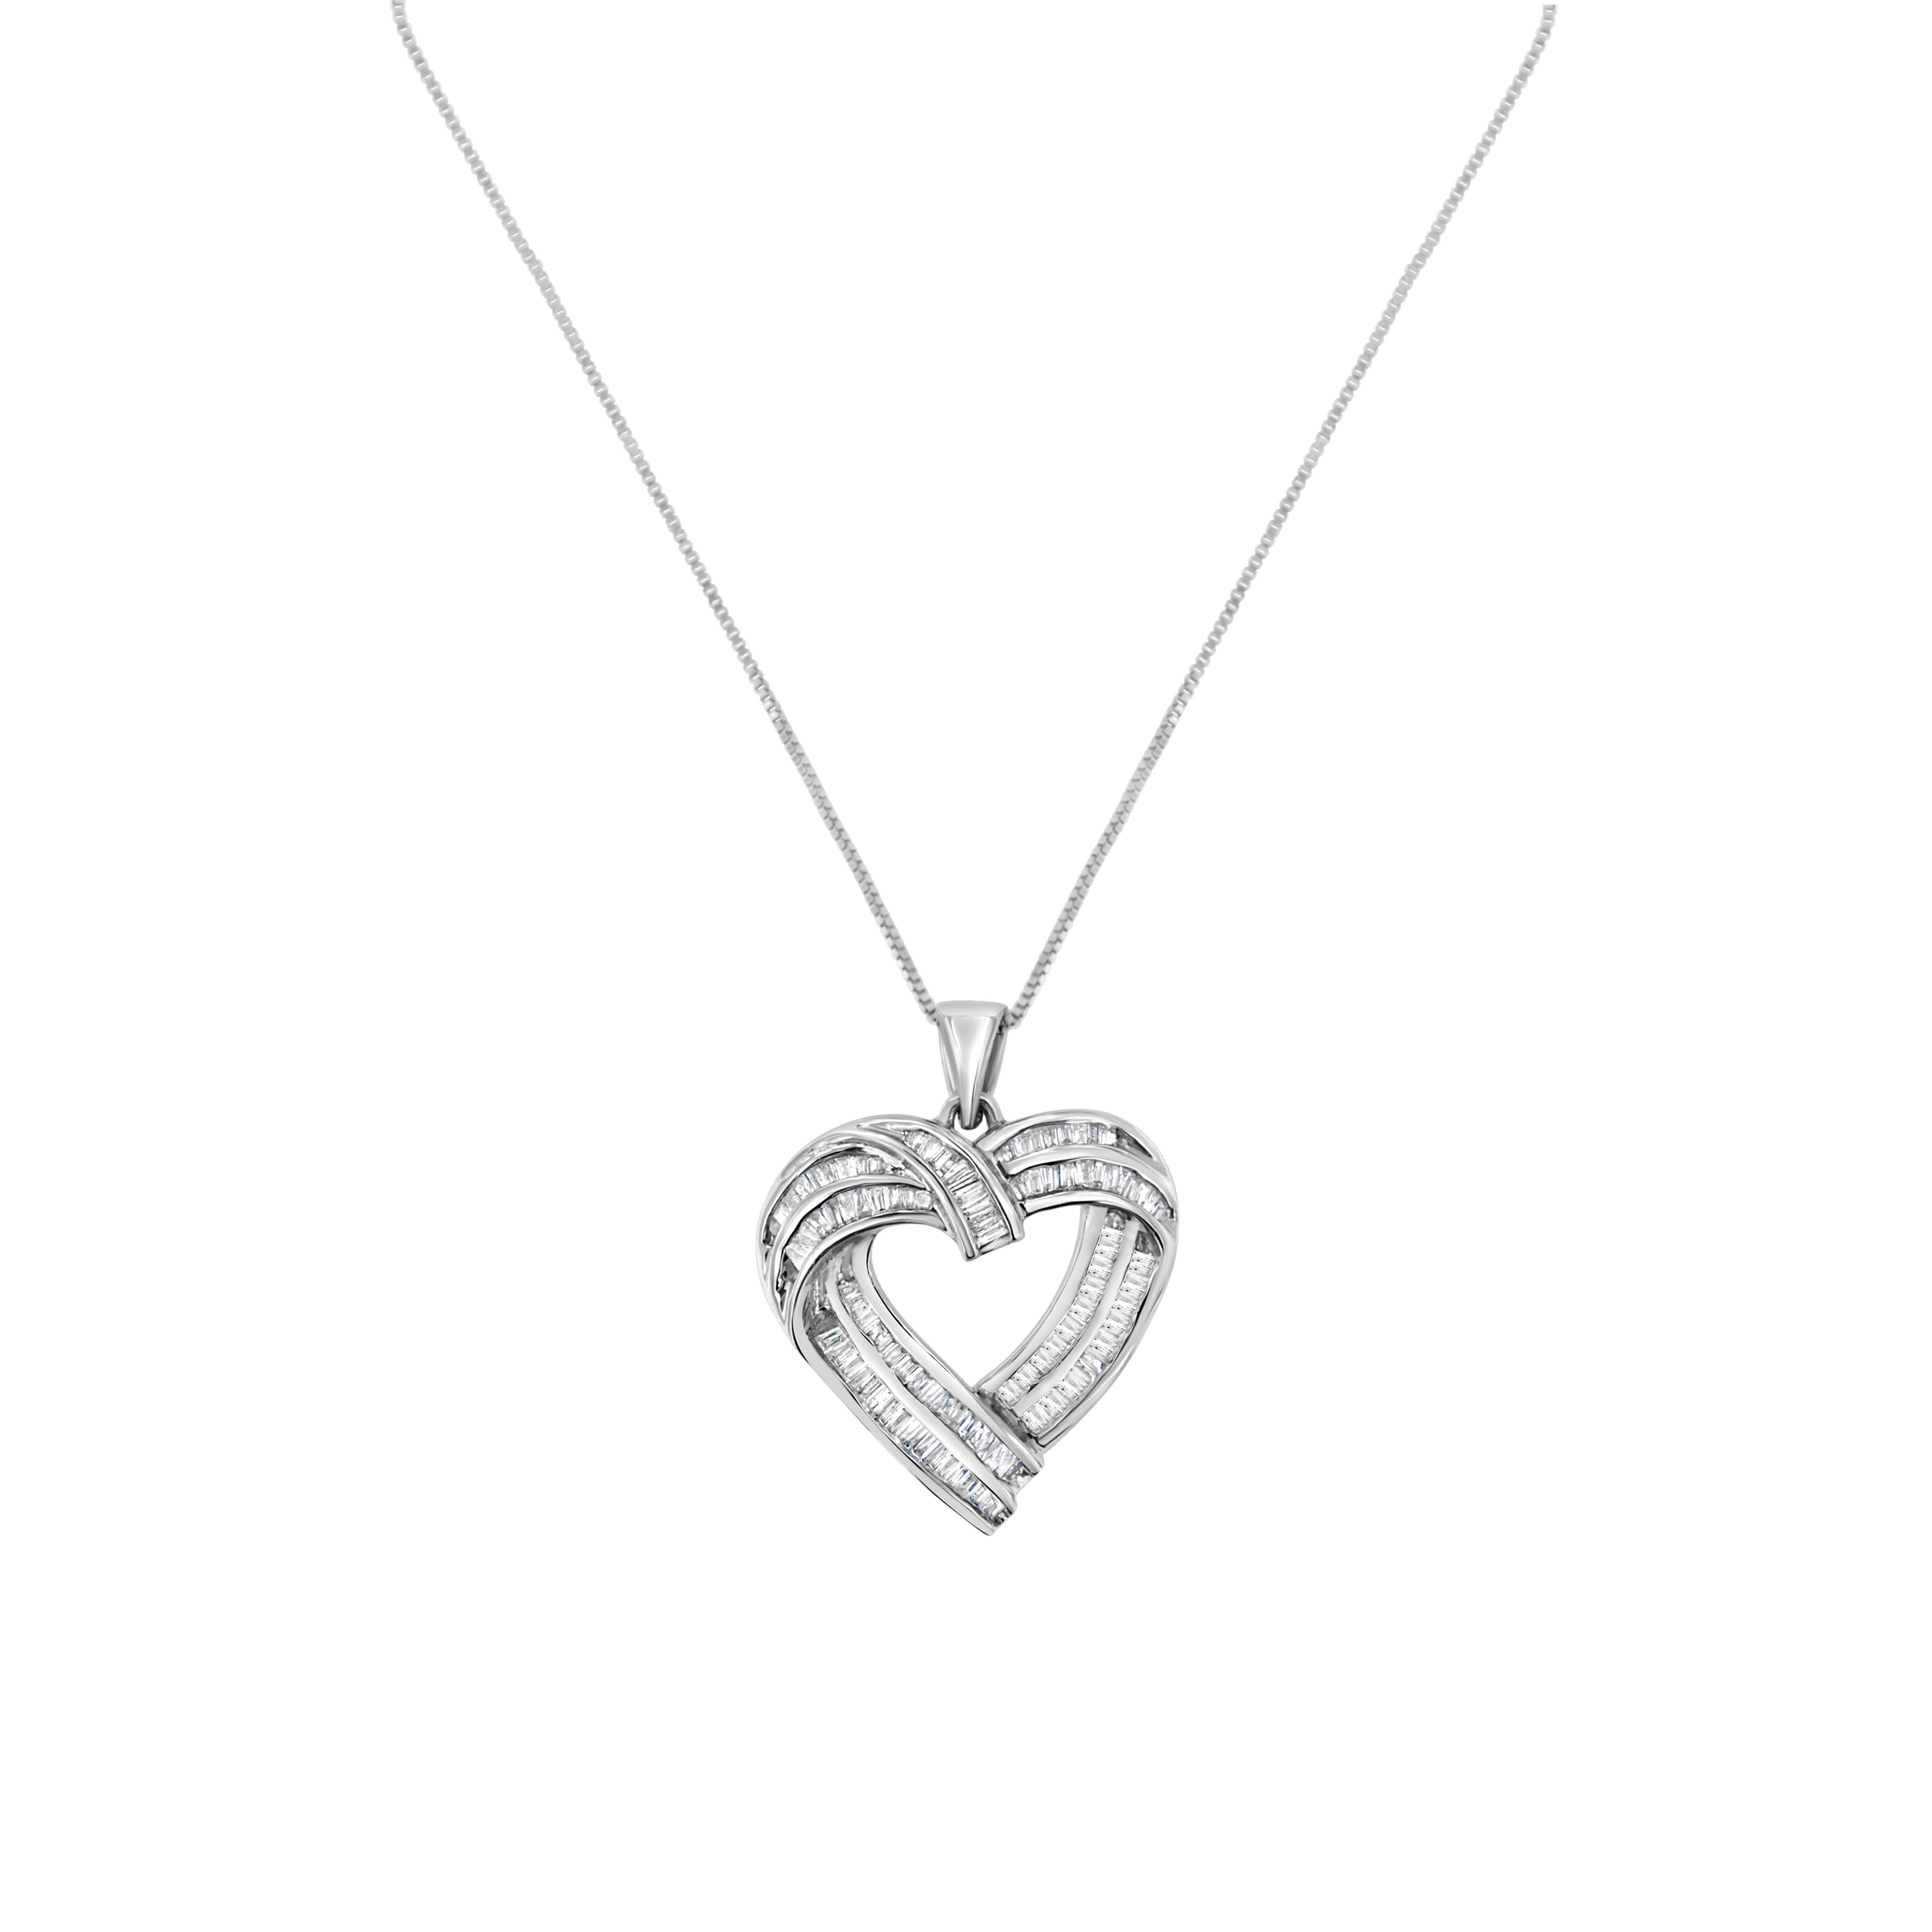 A stunning heart pendant necklace with an interlocking sterling silver design boasting beautiful baguette-cut diamonds. Embellished in a channel setting, this pendant has a total diamond weight of 7/8 carats. This is the perfect accessory for